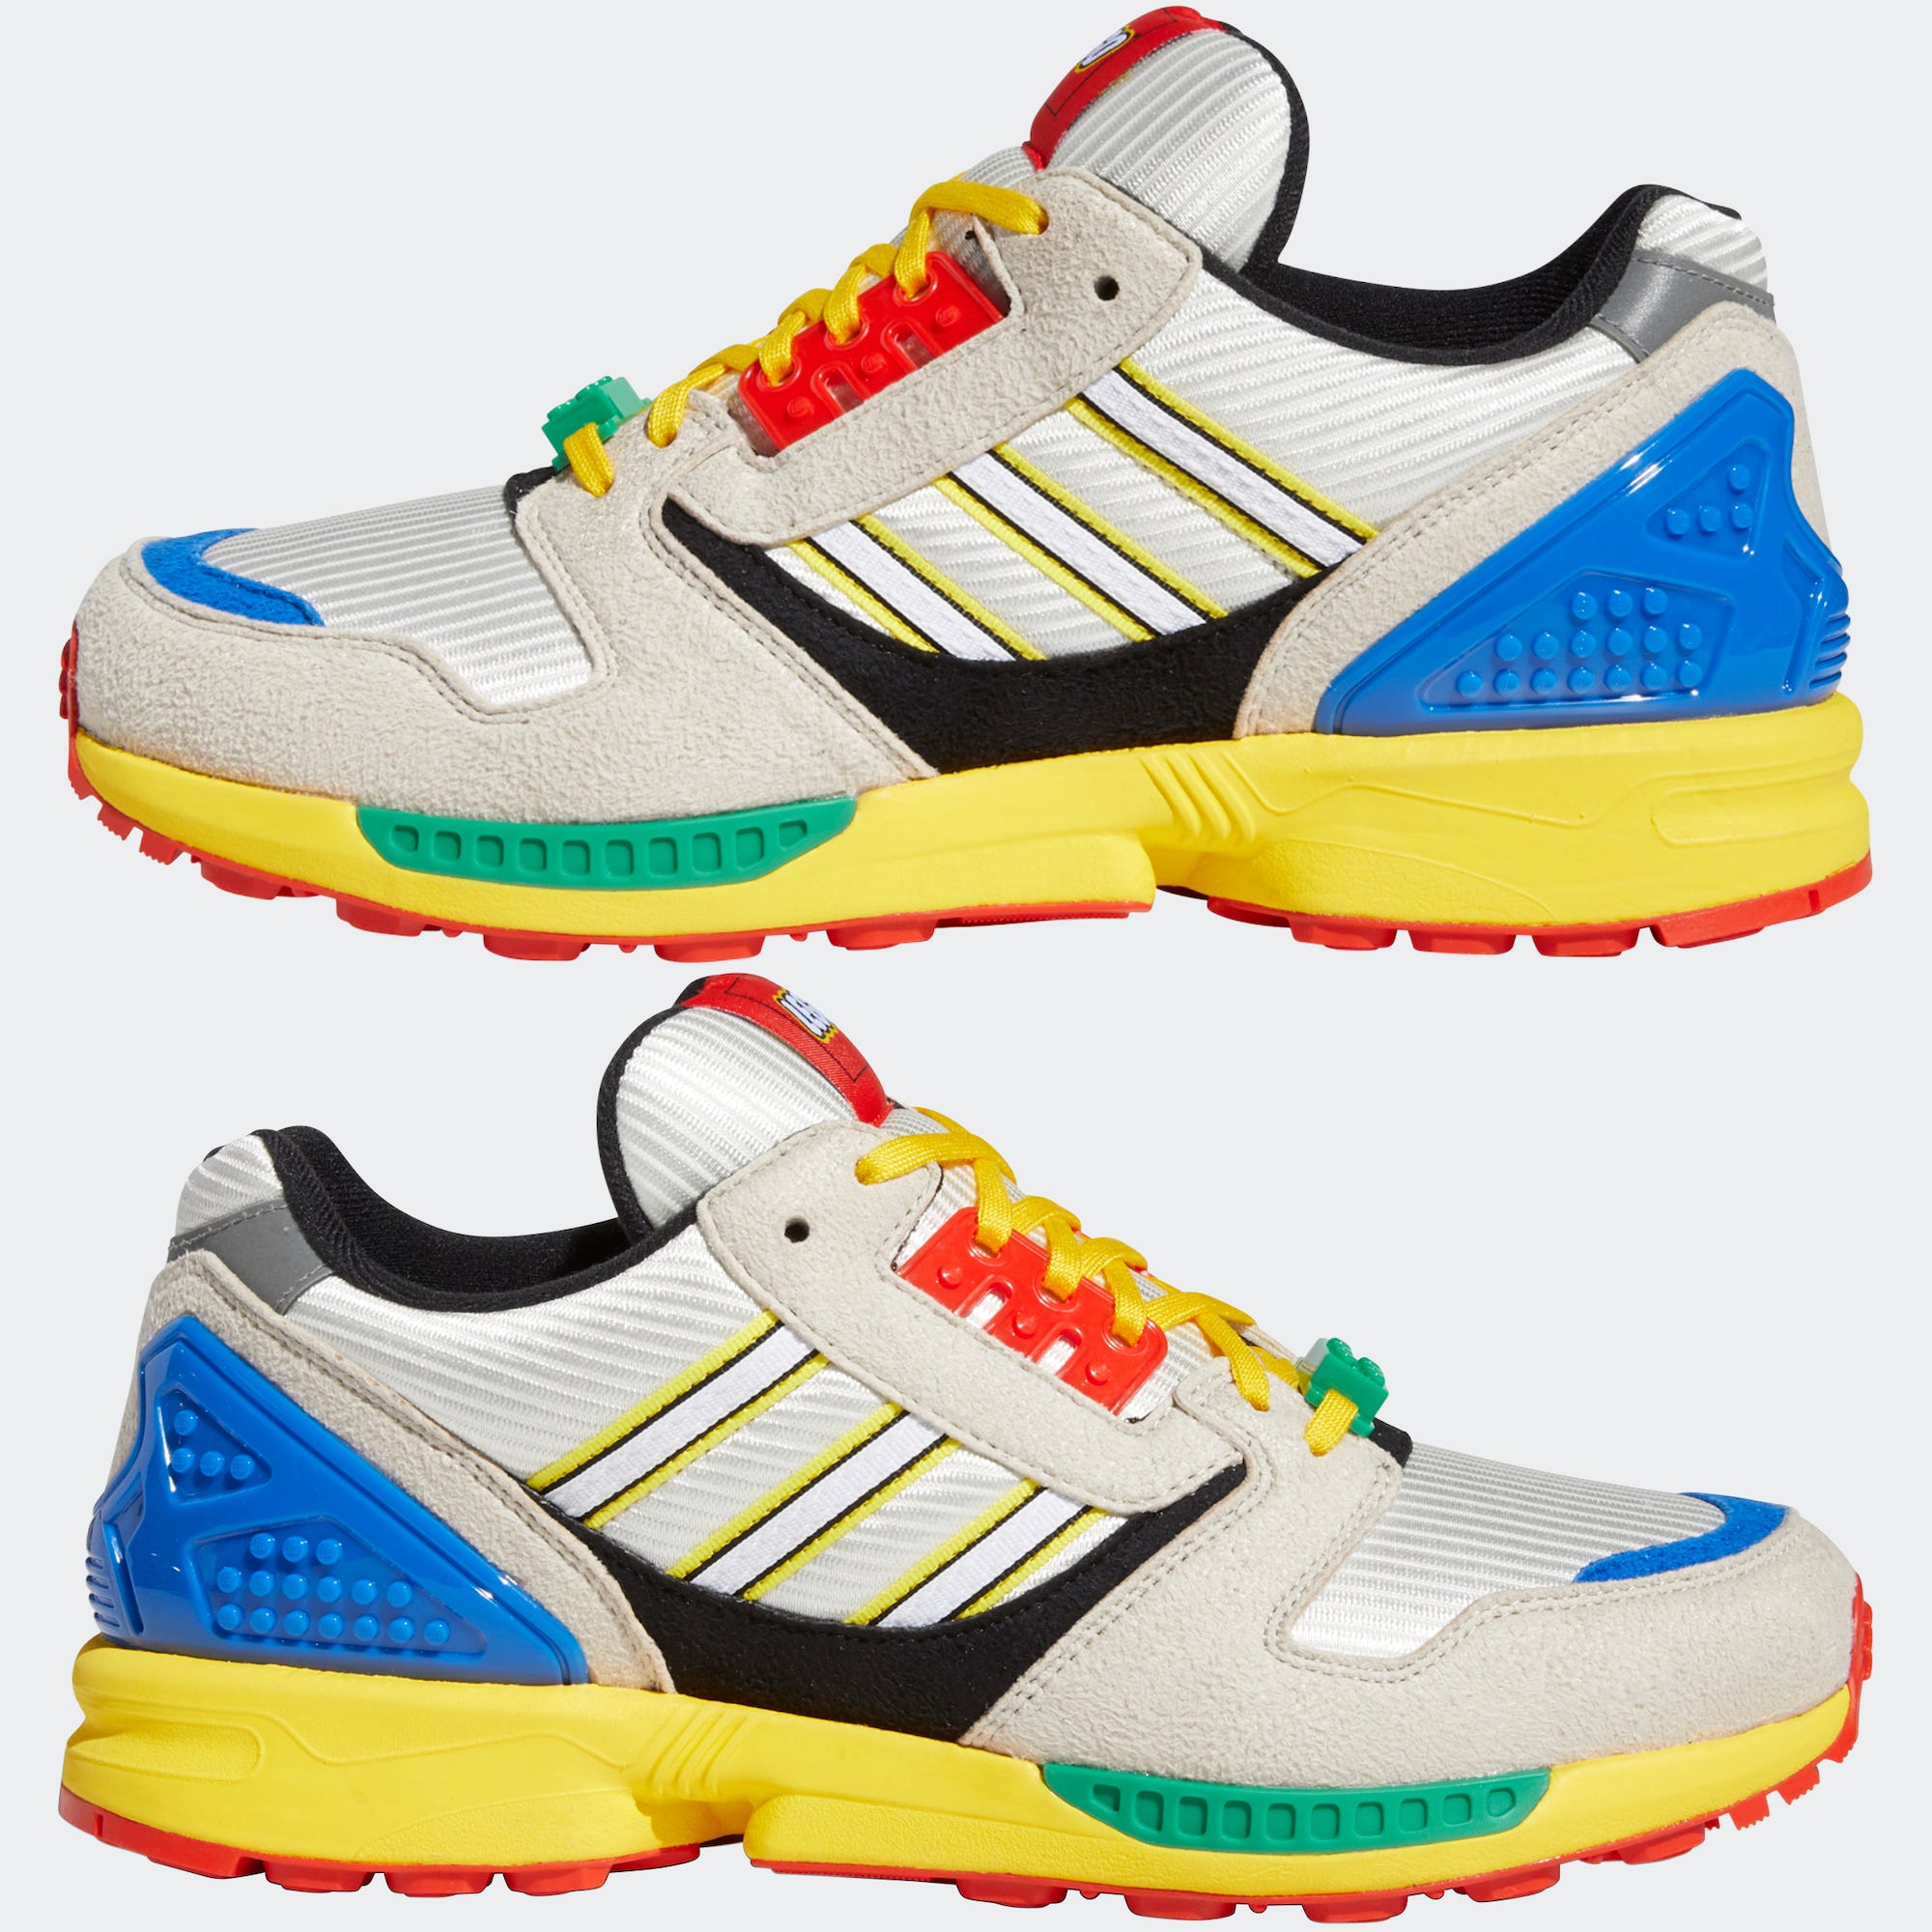 Adidas and are launching $130 sneakers that look just like the colorful